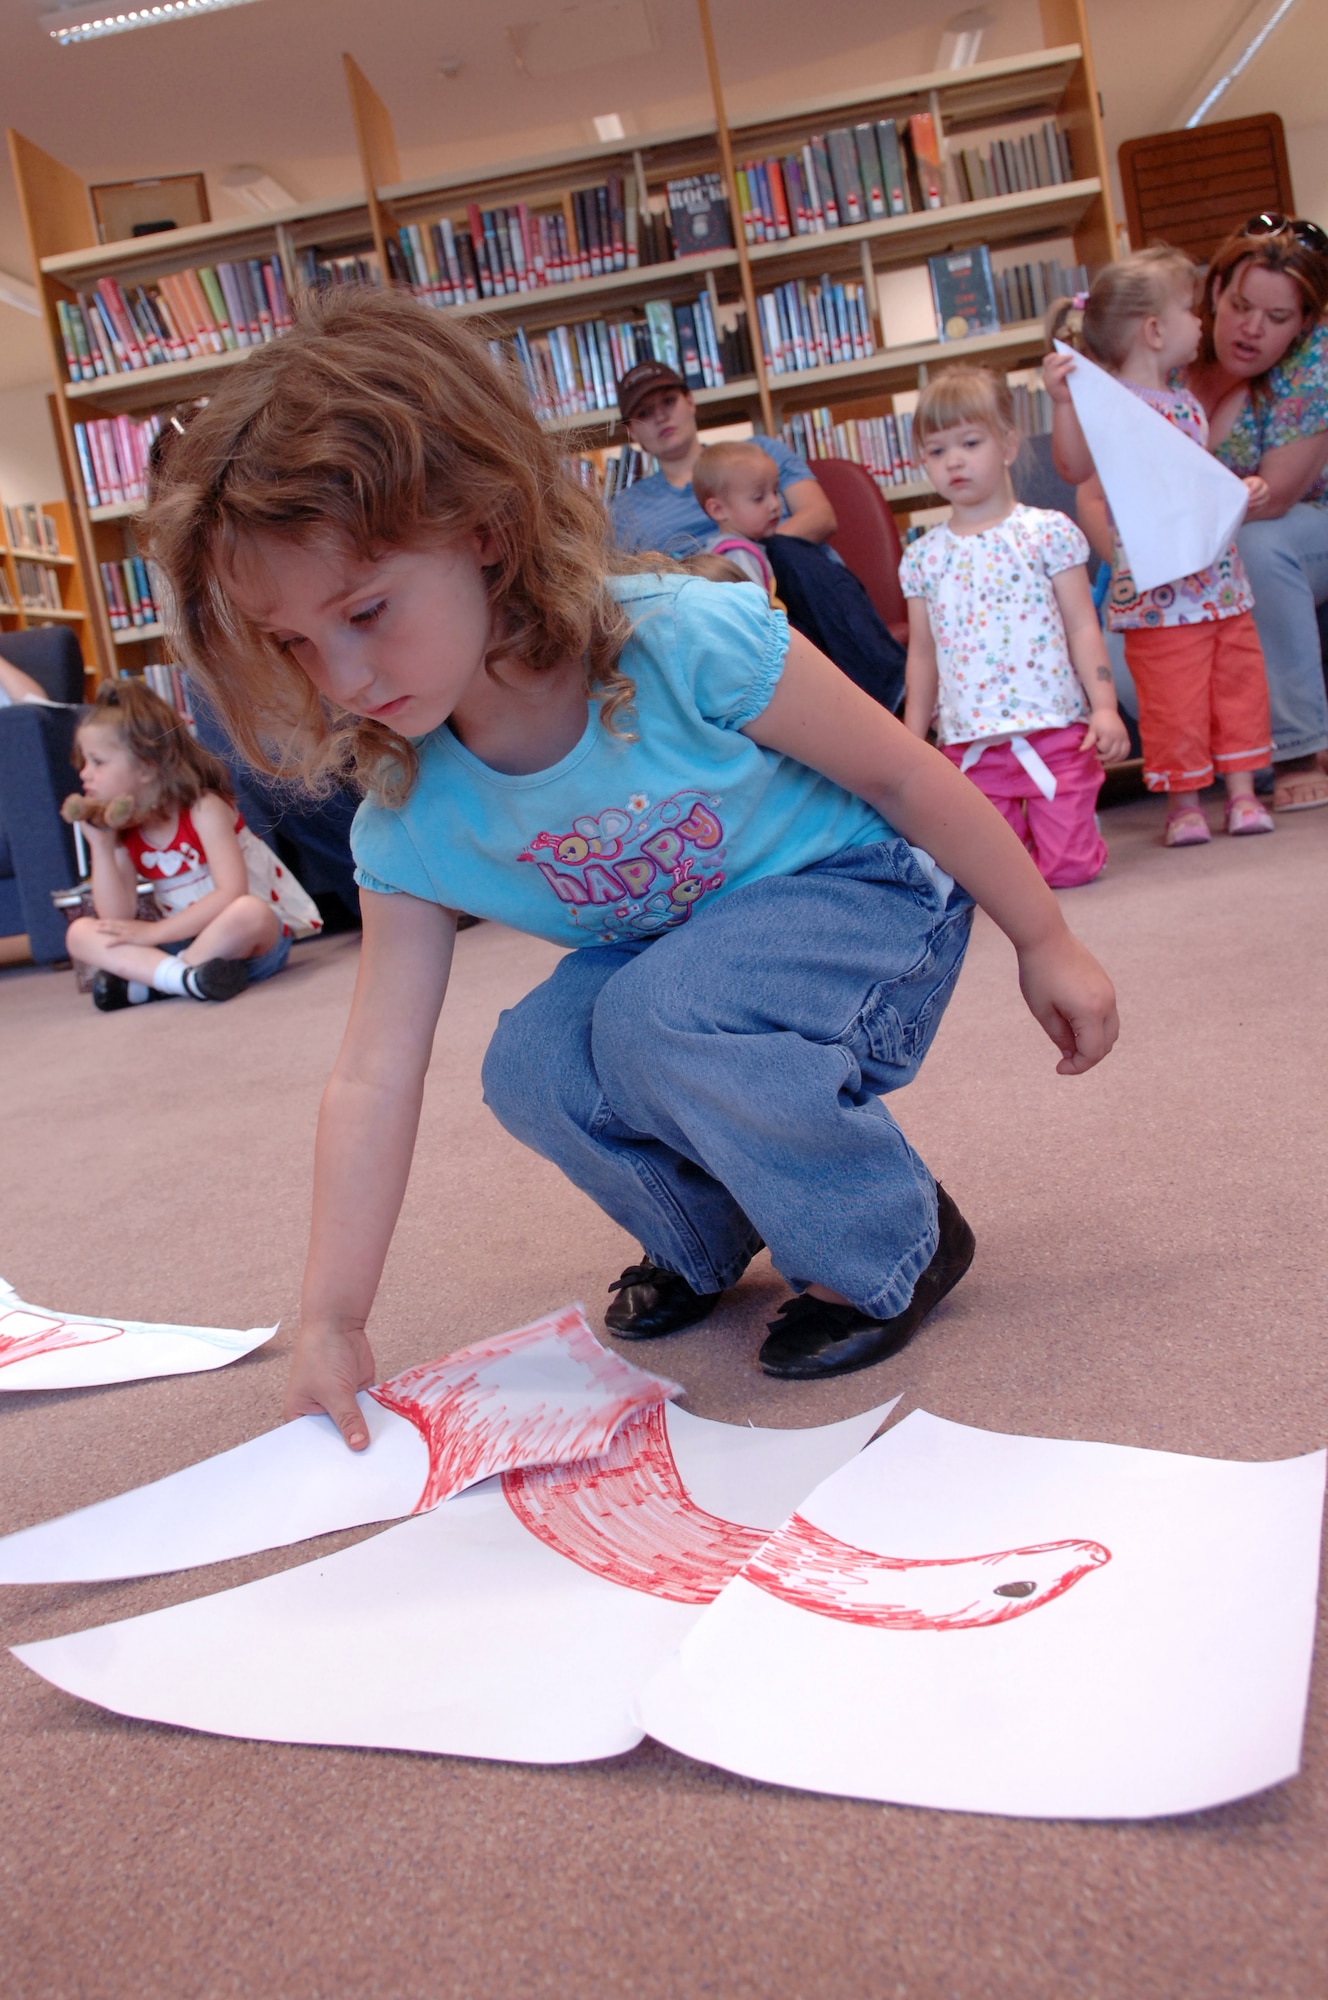 Kaitlin Blakeman, daughter of U.S. Air Force Staff Sgt. James Blakeman, 721st Aircraft Maintenance Squadron, adds her piece of the puzzle to create a dinosaur at the library, June 18, 2009, Ramstein Air Base, Germany. Kaitlin Blakeman, along with other children, pretended to be paleontologists by putting pieces of a dinosaur together to figure out what kind of dinosaur they had discovered, during story time as part of the summer reading program. (U.S. Air Force photo by Senior Airman Amanda Dick)